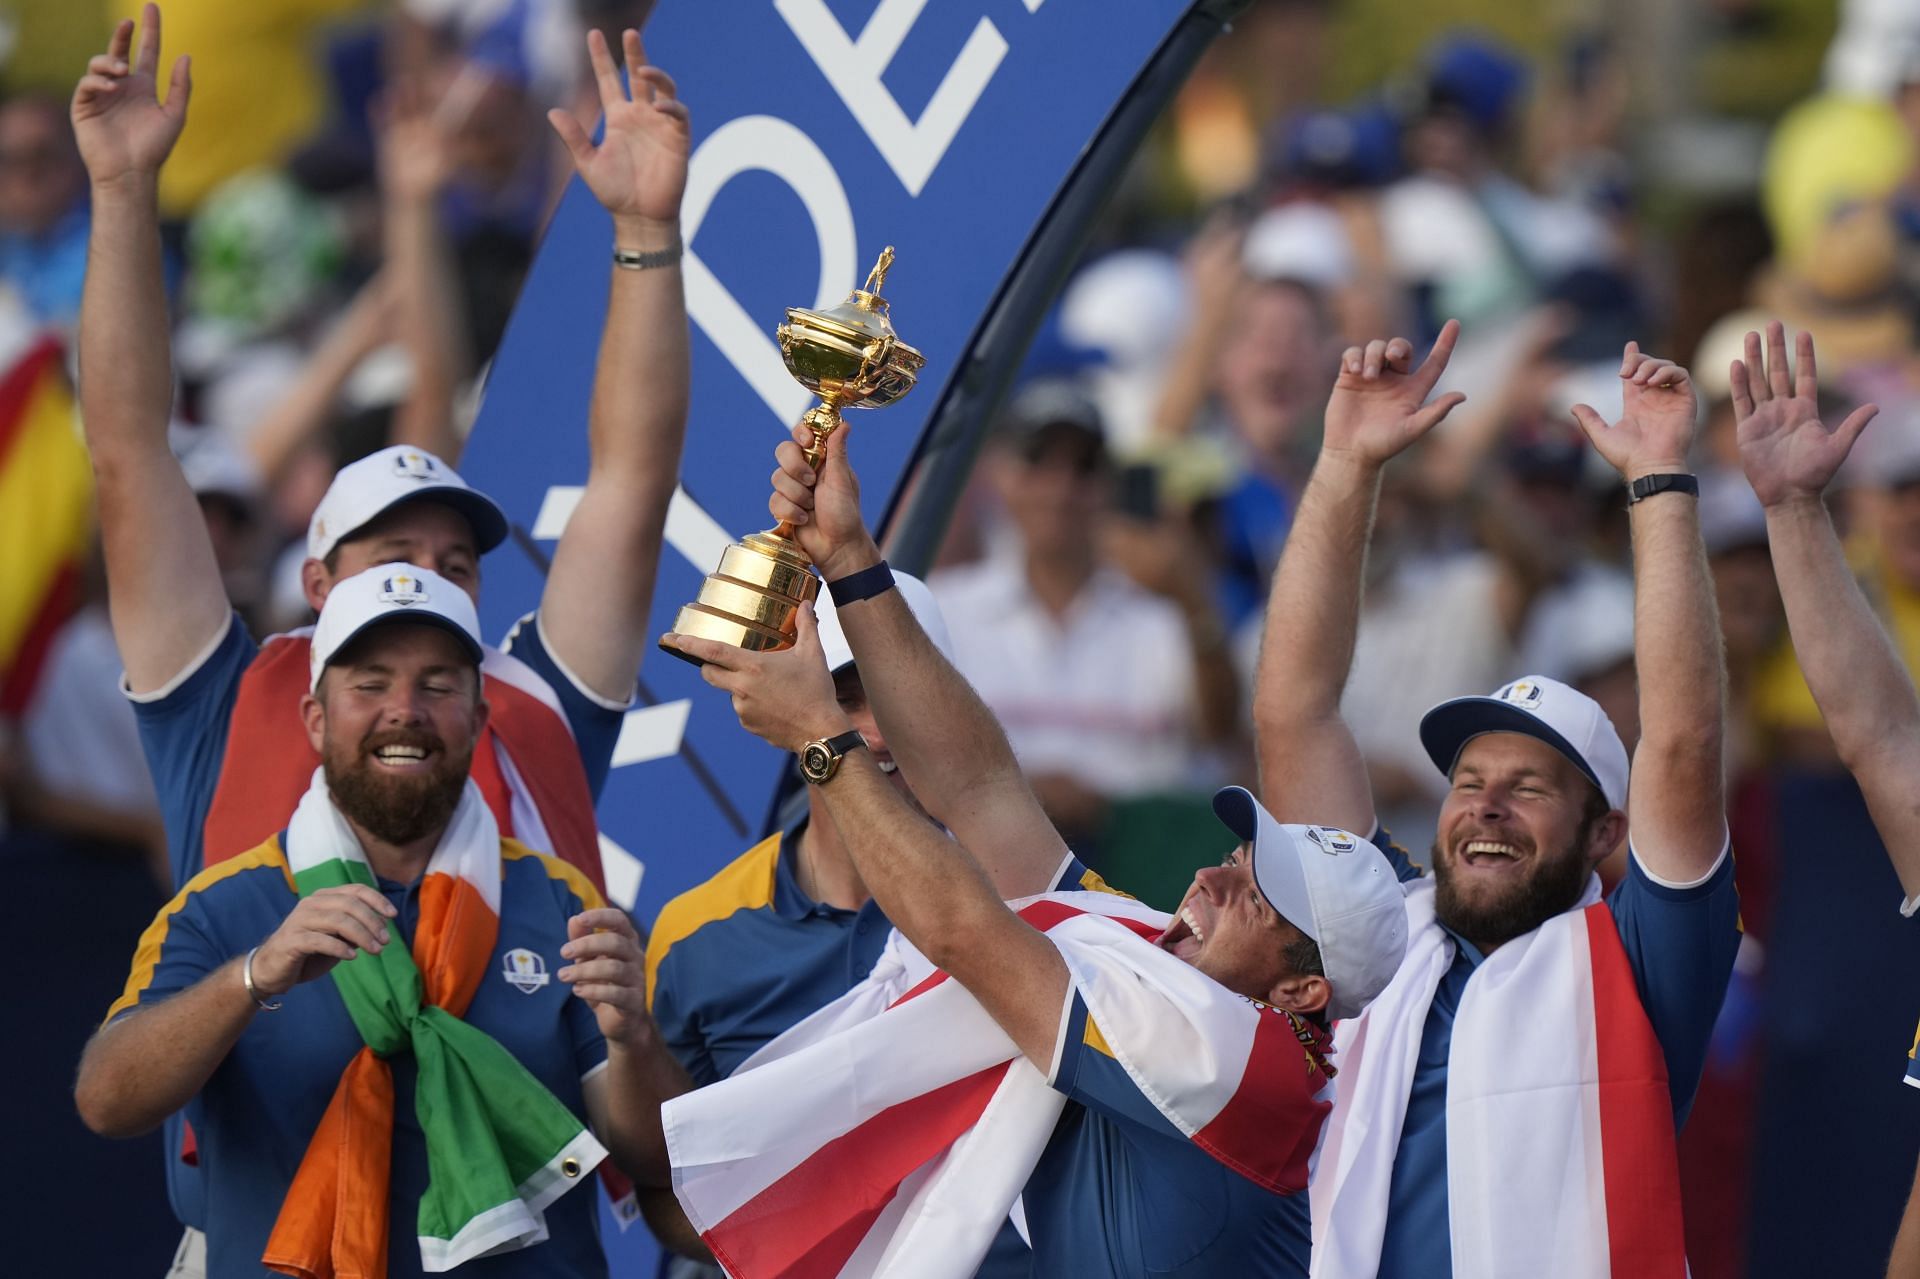 Europe&#039;s Rory McIlroy lifts the Ryder Cup after Europe won the trophy defeating the United States at the Marco Simone Golf Club (Image via AP Photo)